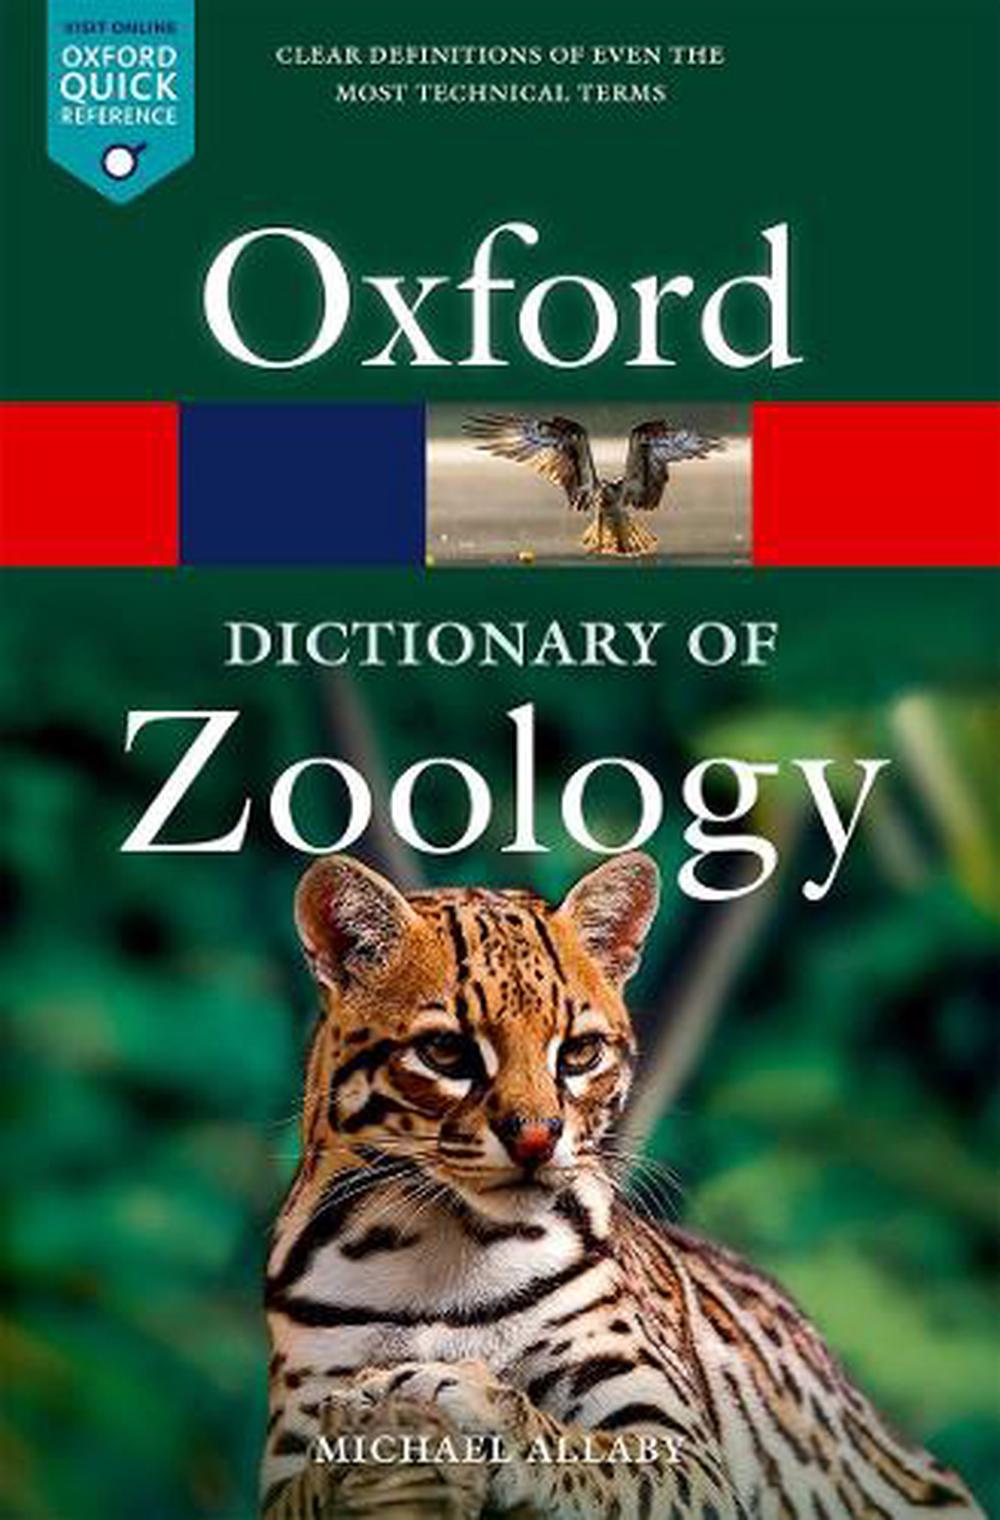 Dictionary of Zoology by Michael Allaby (English) Paperback Book Free